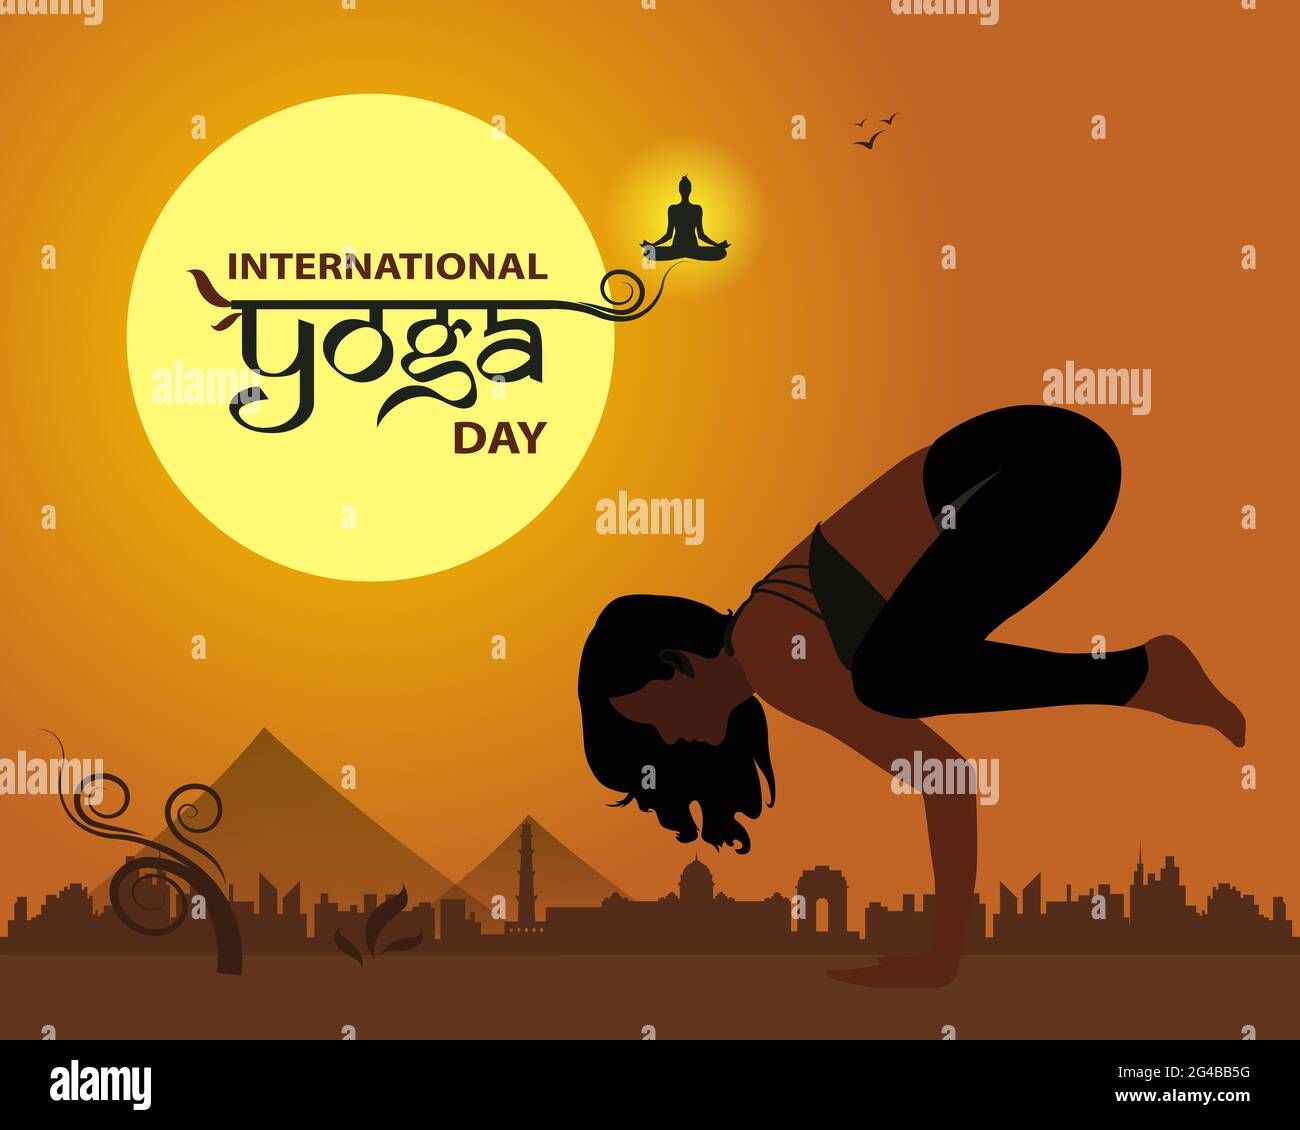 International Yoga Day Illustration with Woman Yoga Silhouette body postures. Fitness girl doing yoga for fitness and wellness. Stock Vector